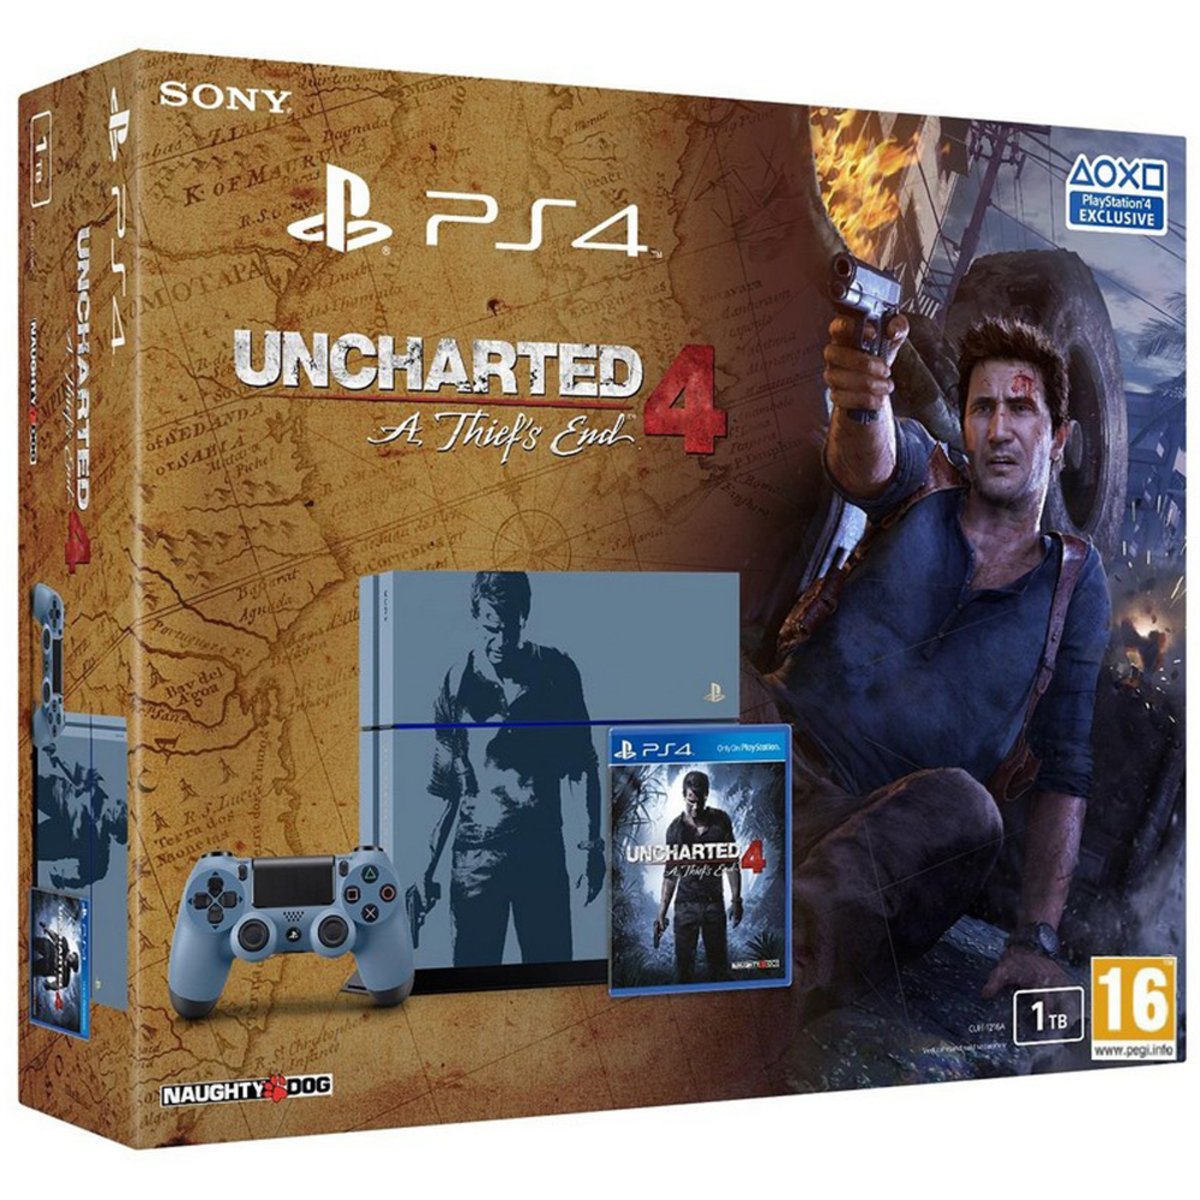 PlayStation 4 Limited Edition Uncharted 4 Console Bundle (PS4)